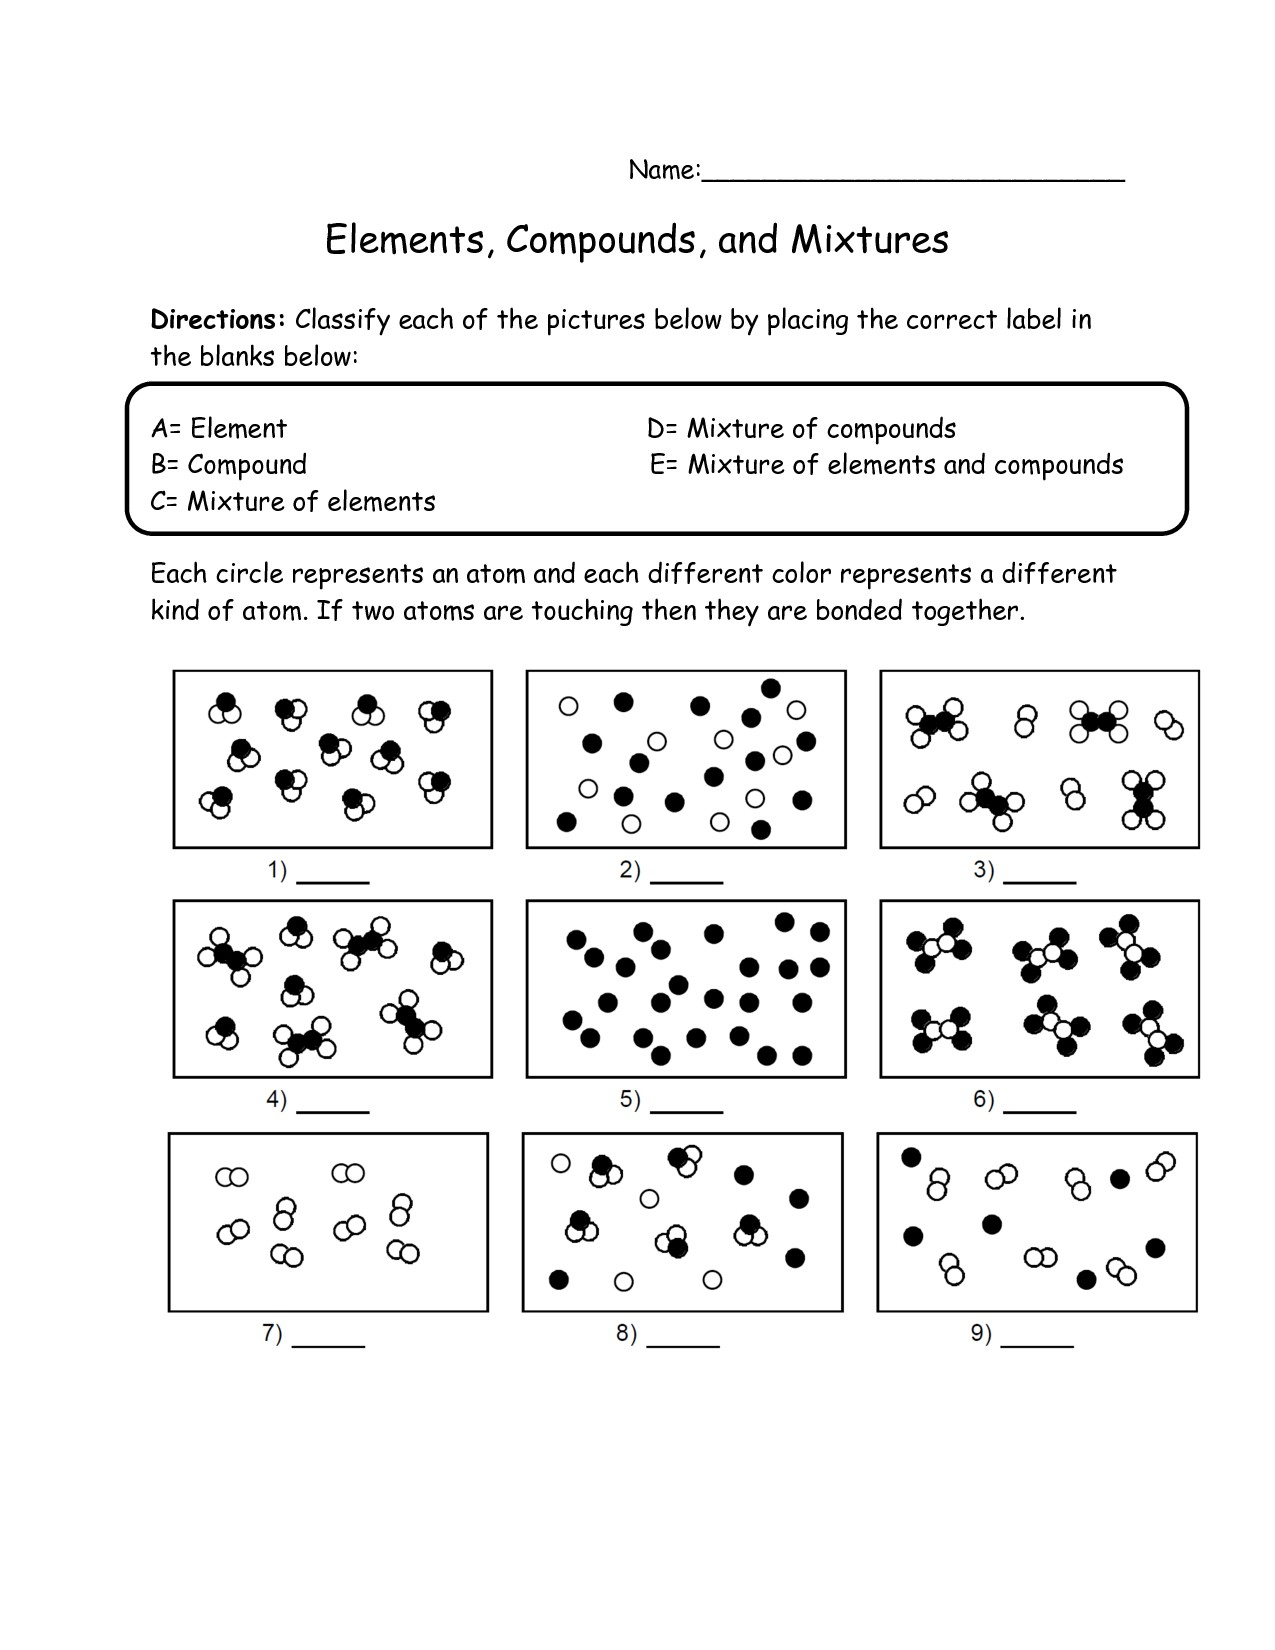 Elements Compounds And Mixtures Interactive Worksheet Answers